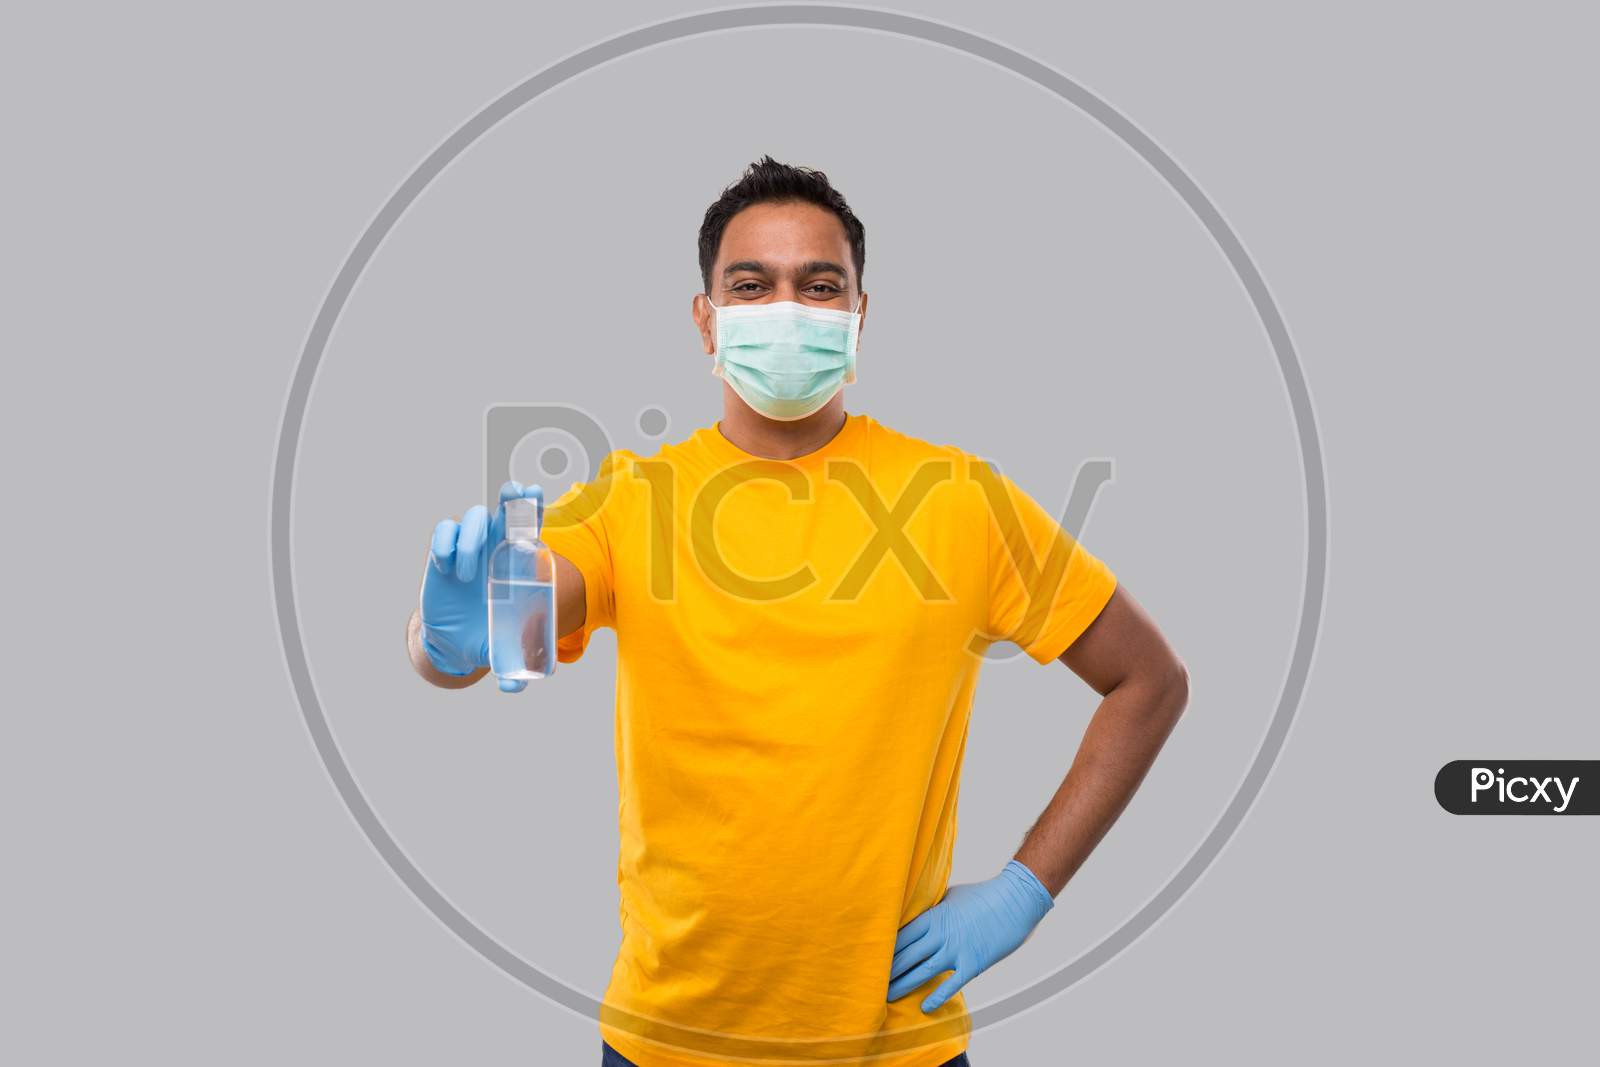 Indian Man Showing Hands Sanitizer Wearing Medical Mask And Gloves Isolated. Indian Man Holding Hand Antiseptic